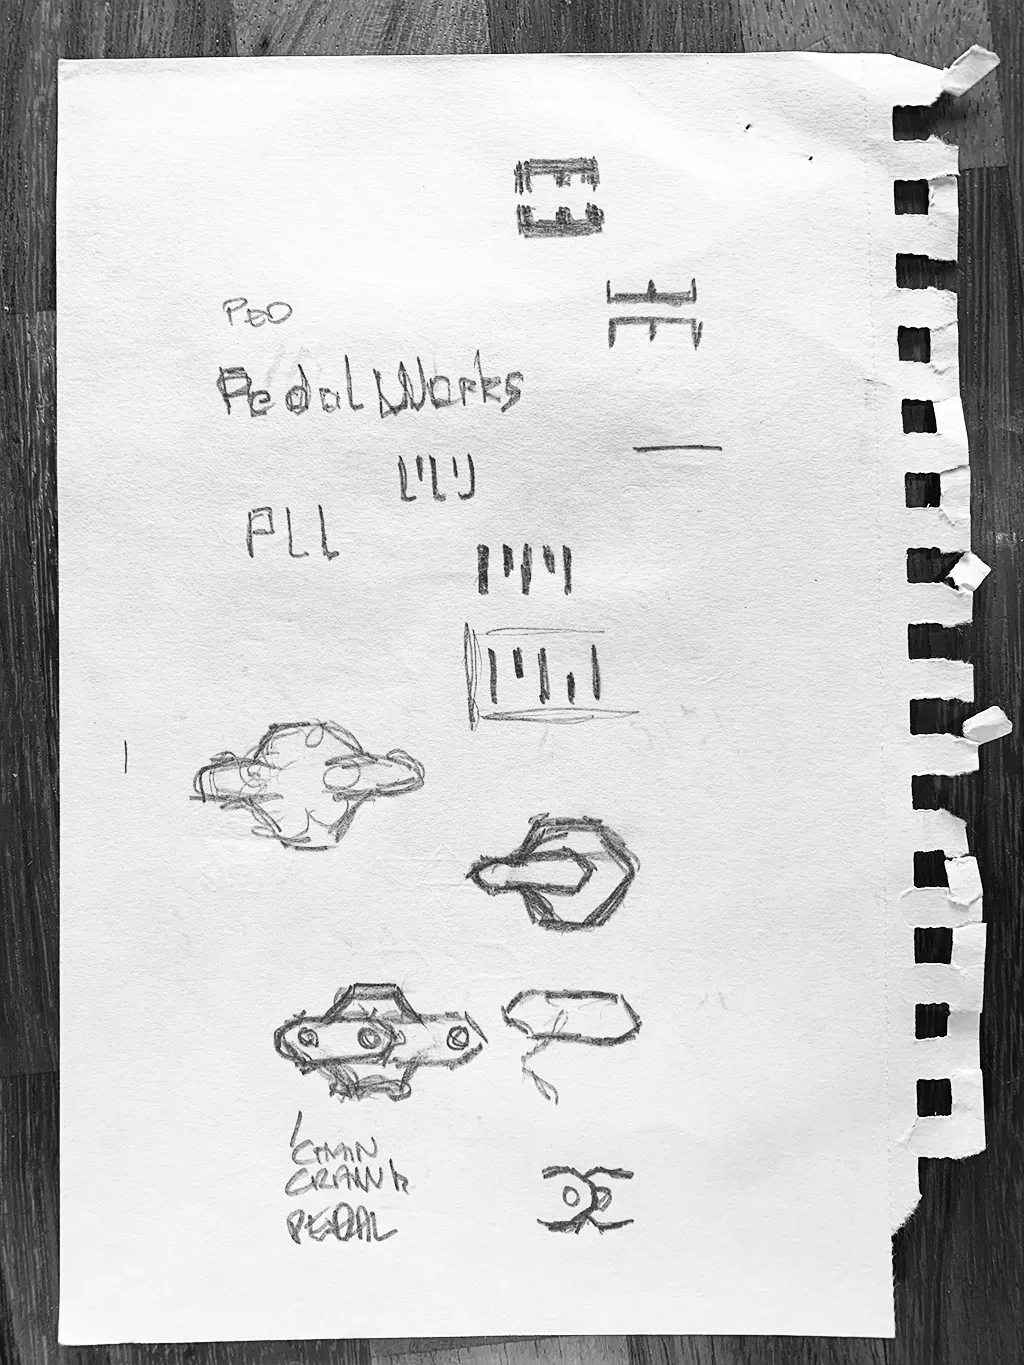 PedalWorks Bike Shop Logo Sketches by The Logo Smith